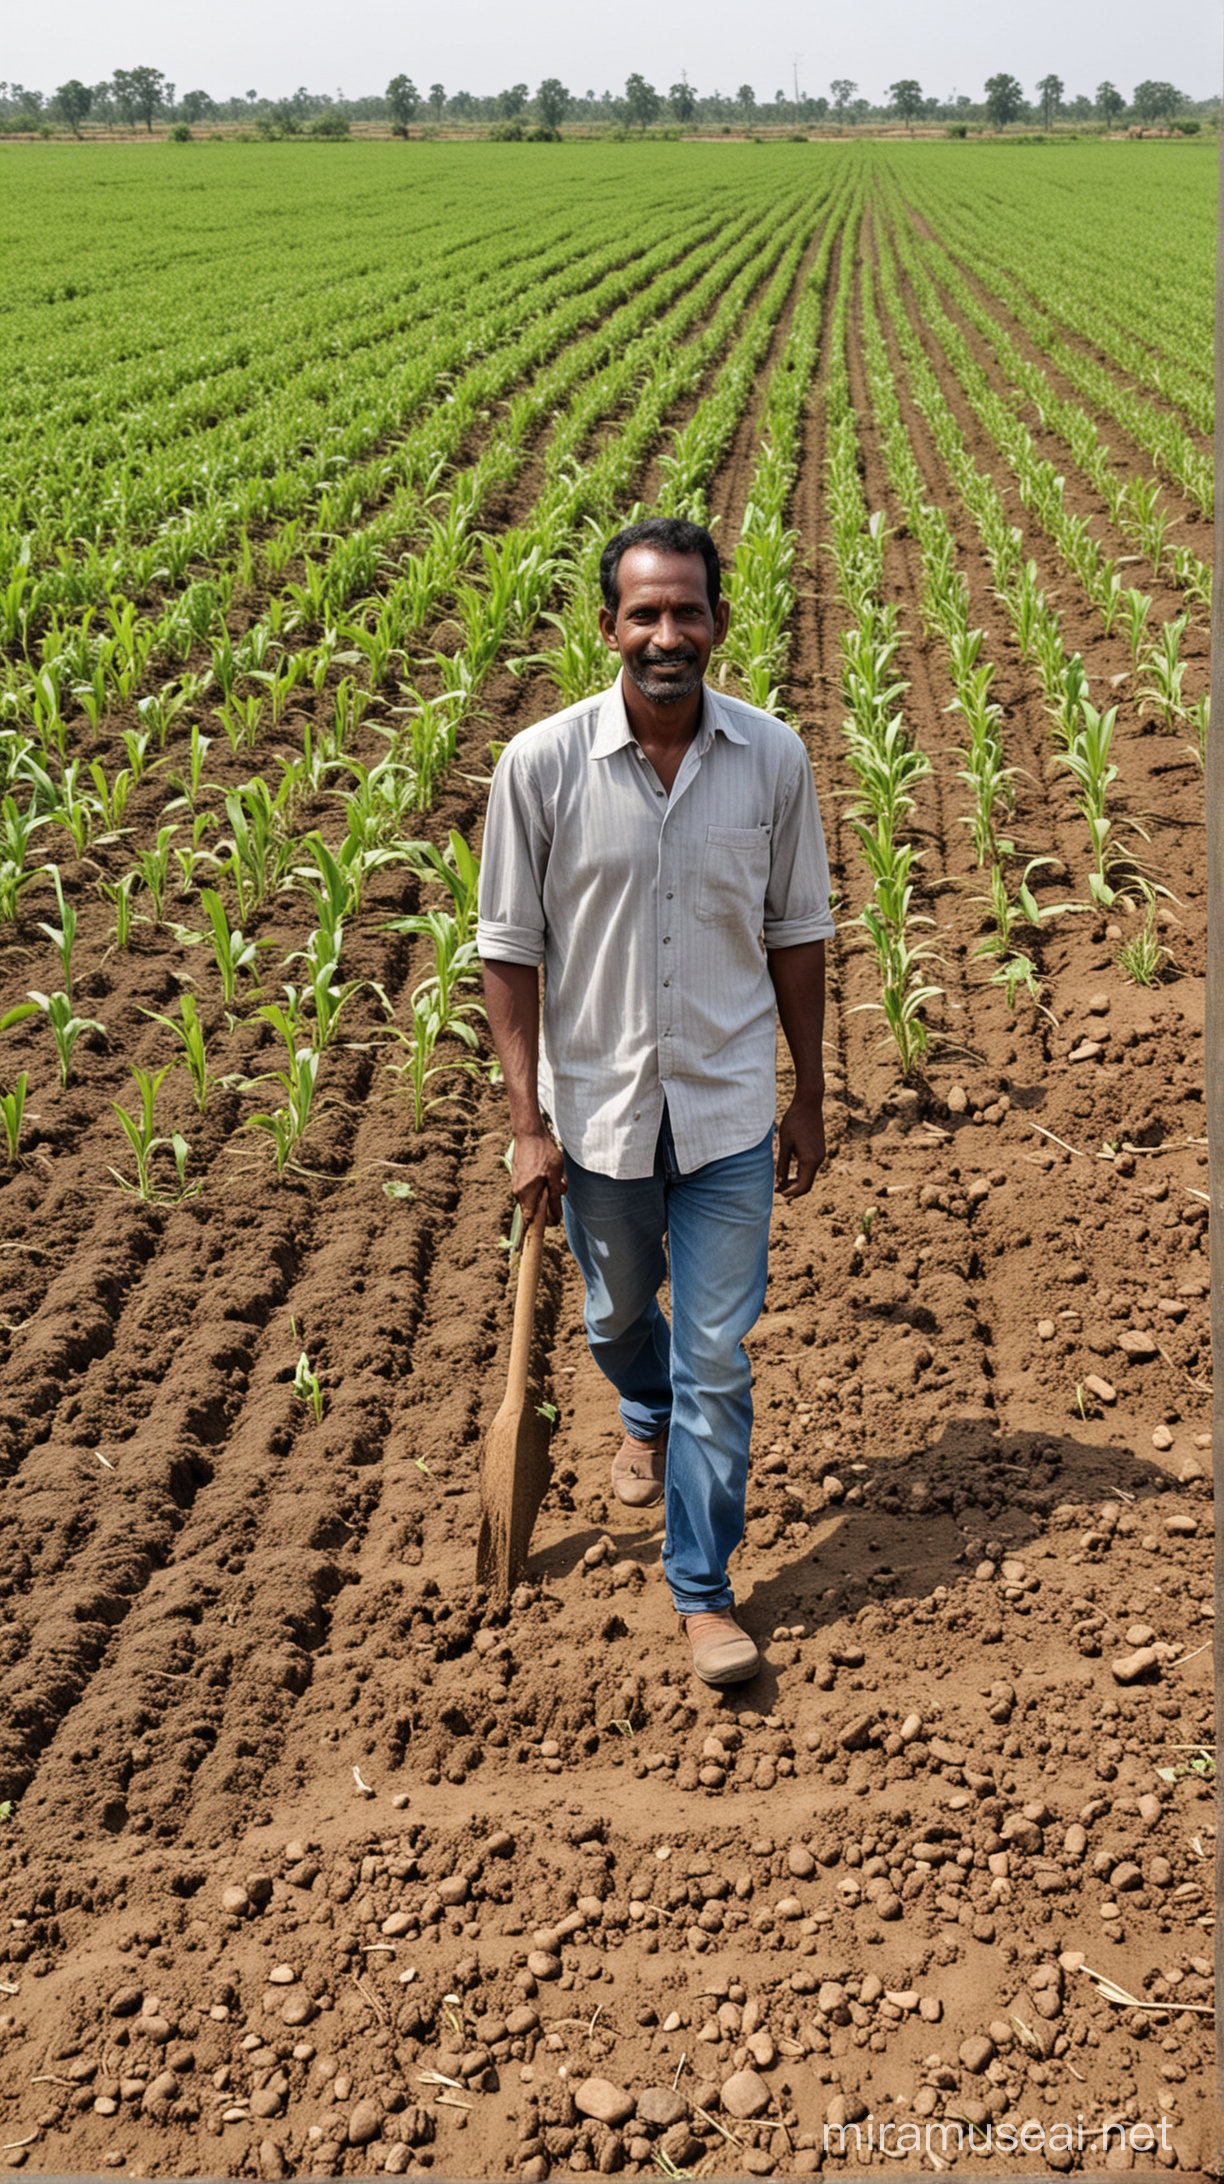 Adoption journey of a farmer who don't have skills of using agriculture inputs